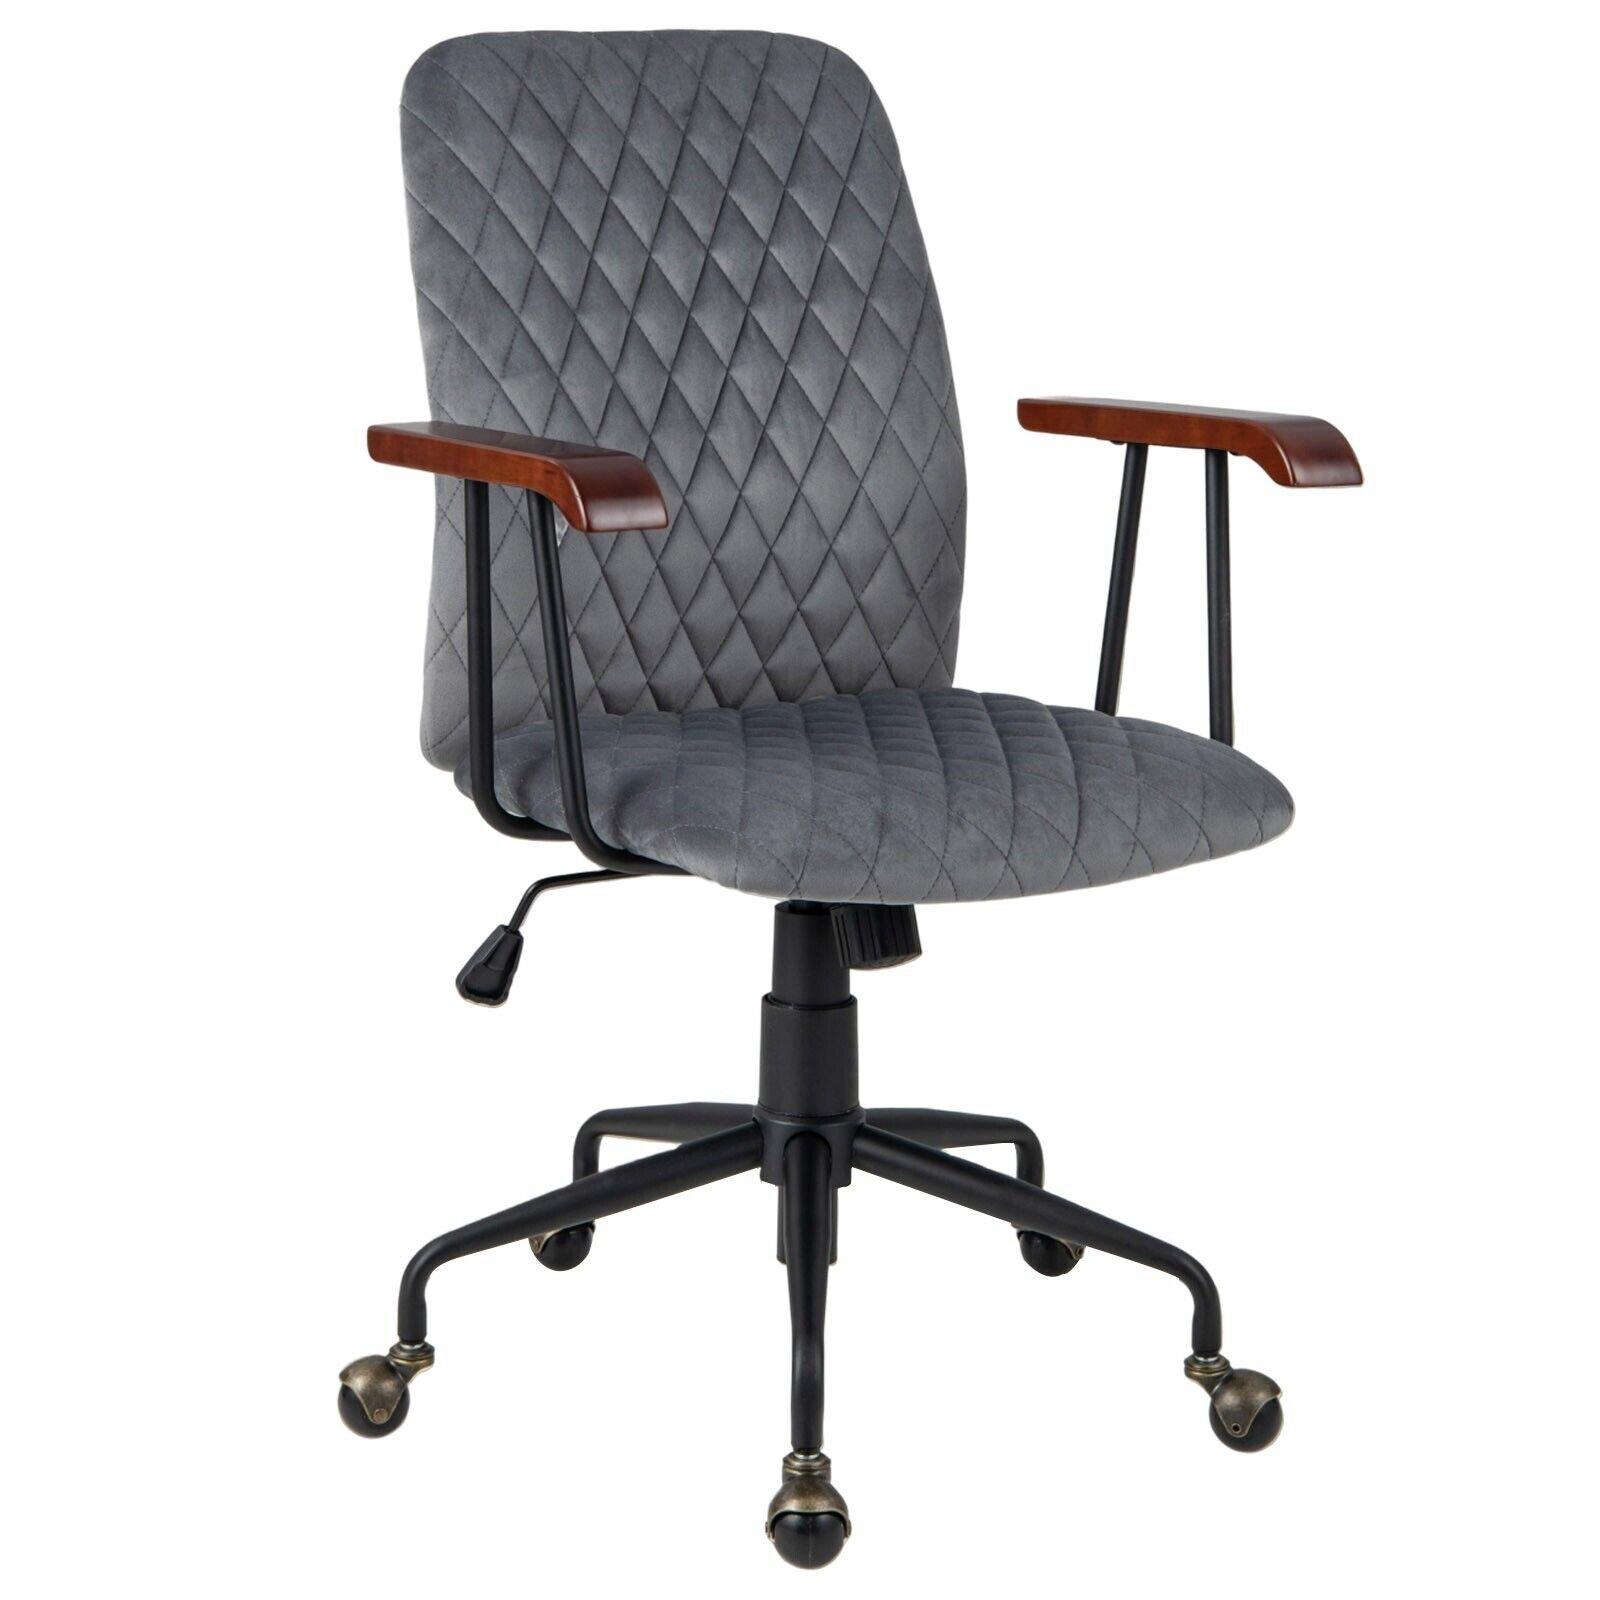 Velvet Leisure Chair Adjustable Swivel Home Office Chair Rolling Computer Chair Grey